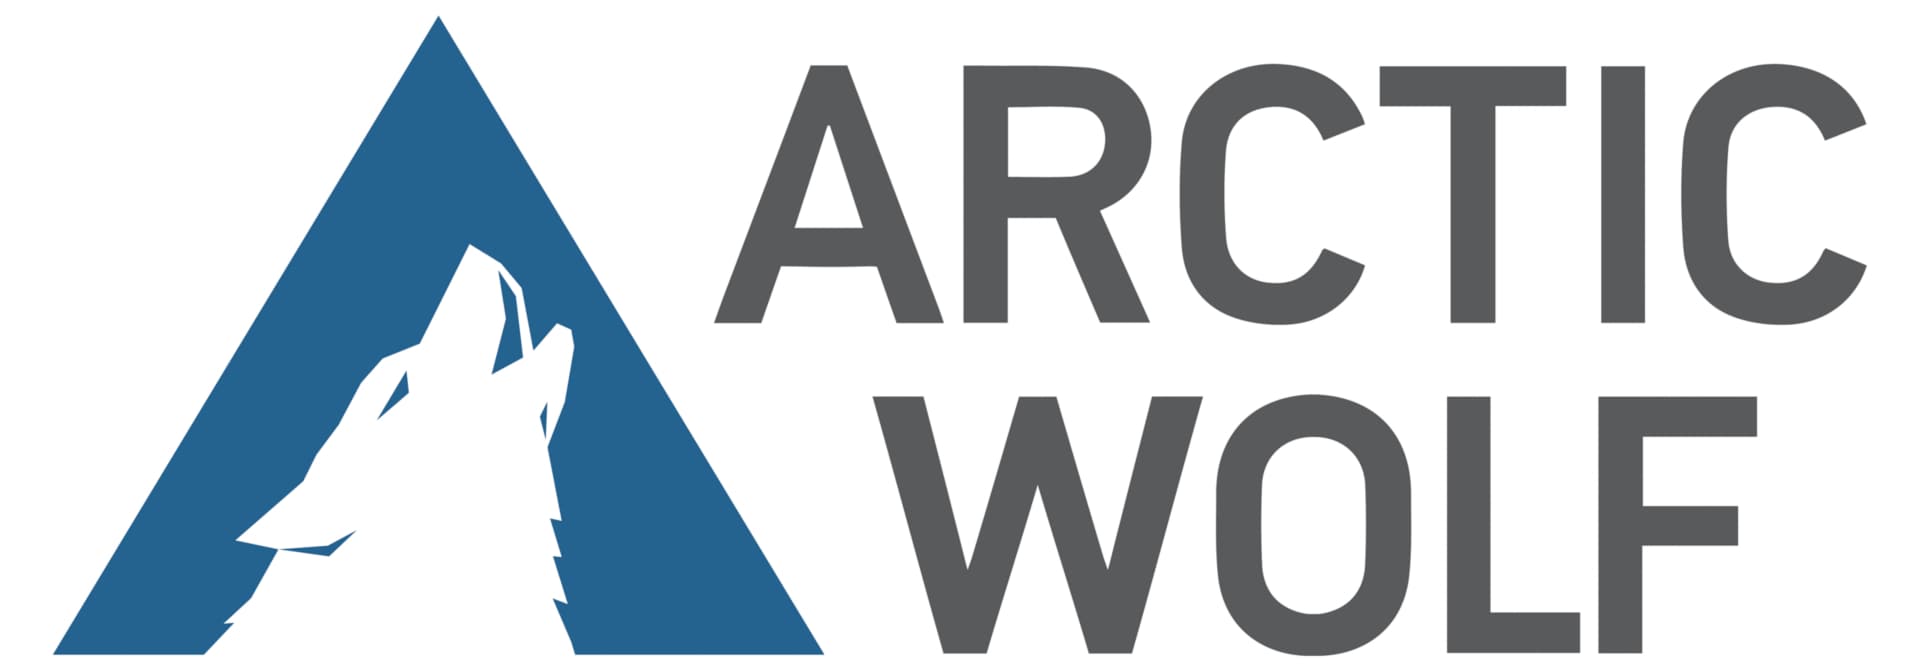 Arctic Wolf Managed Detection and Response - license - 1 server